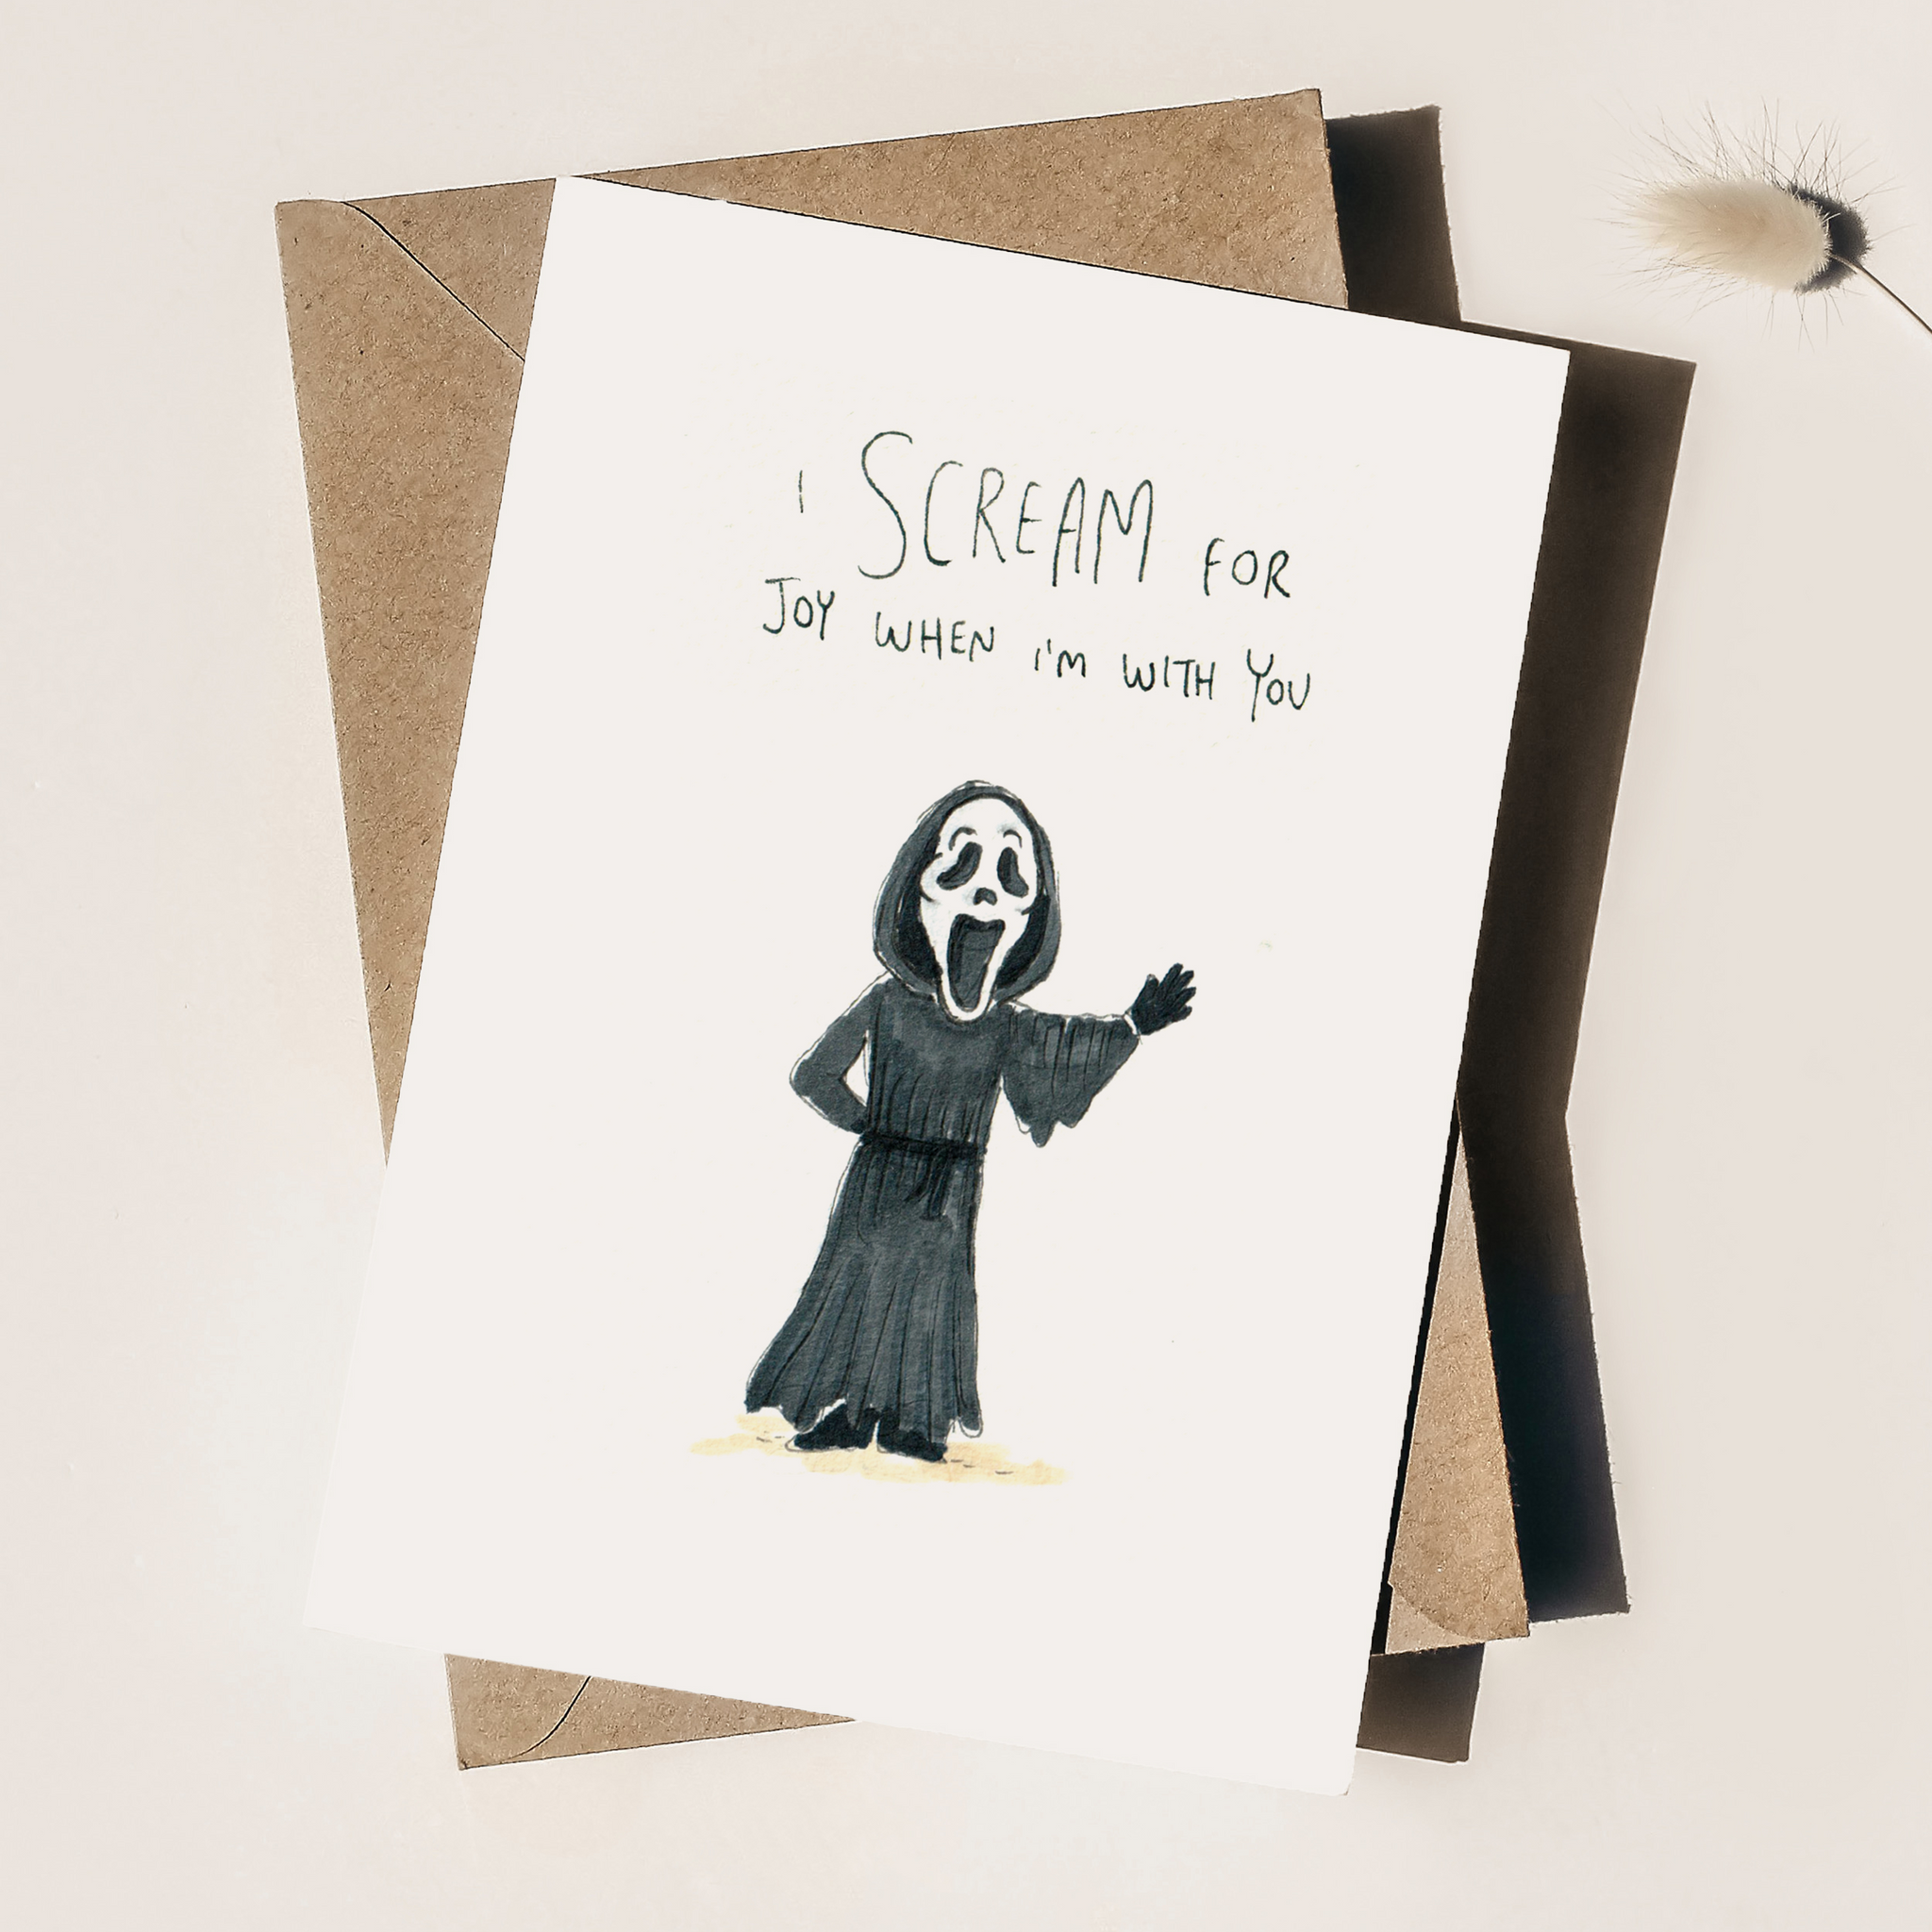 I Scream For You When I'm with You - Digital Download